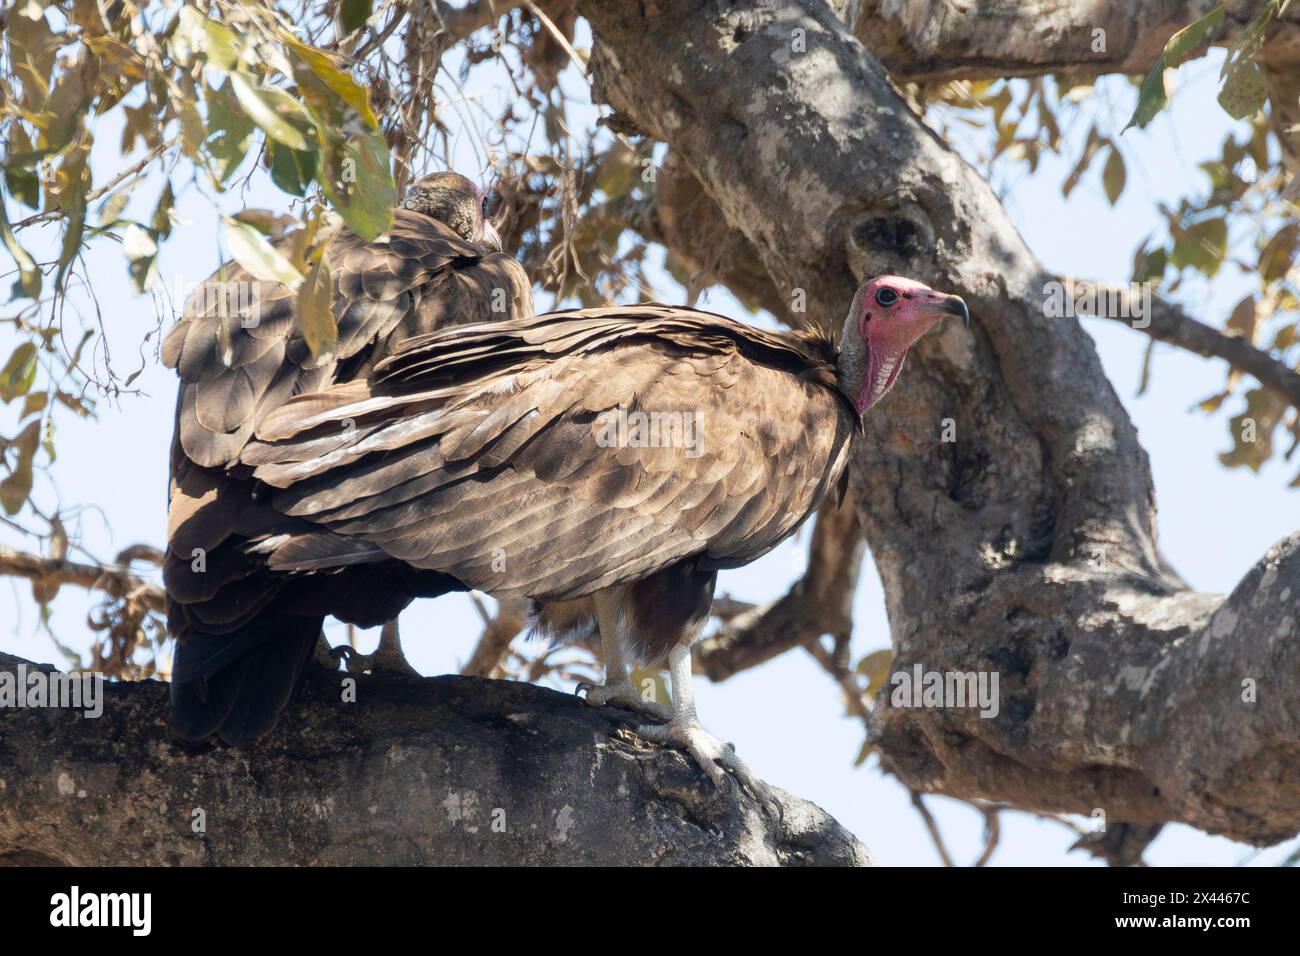 Hooded Vulture (Necrosyrtes monachus) with red facial skin, Kruger National Park, South Africa.Considered Critically Endangered bird Stock Photo